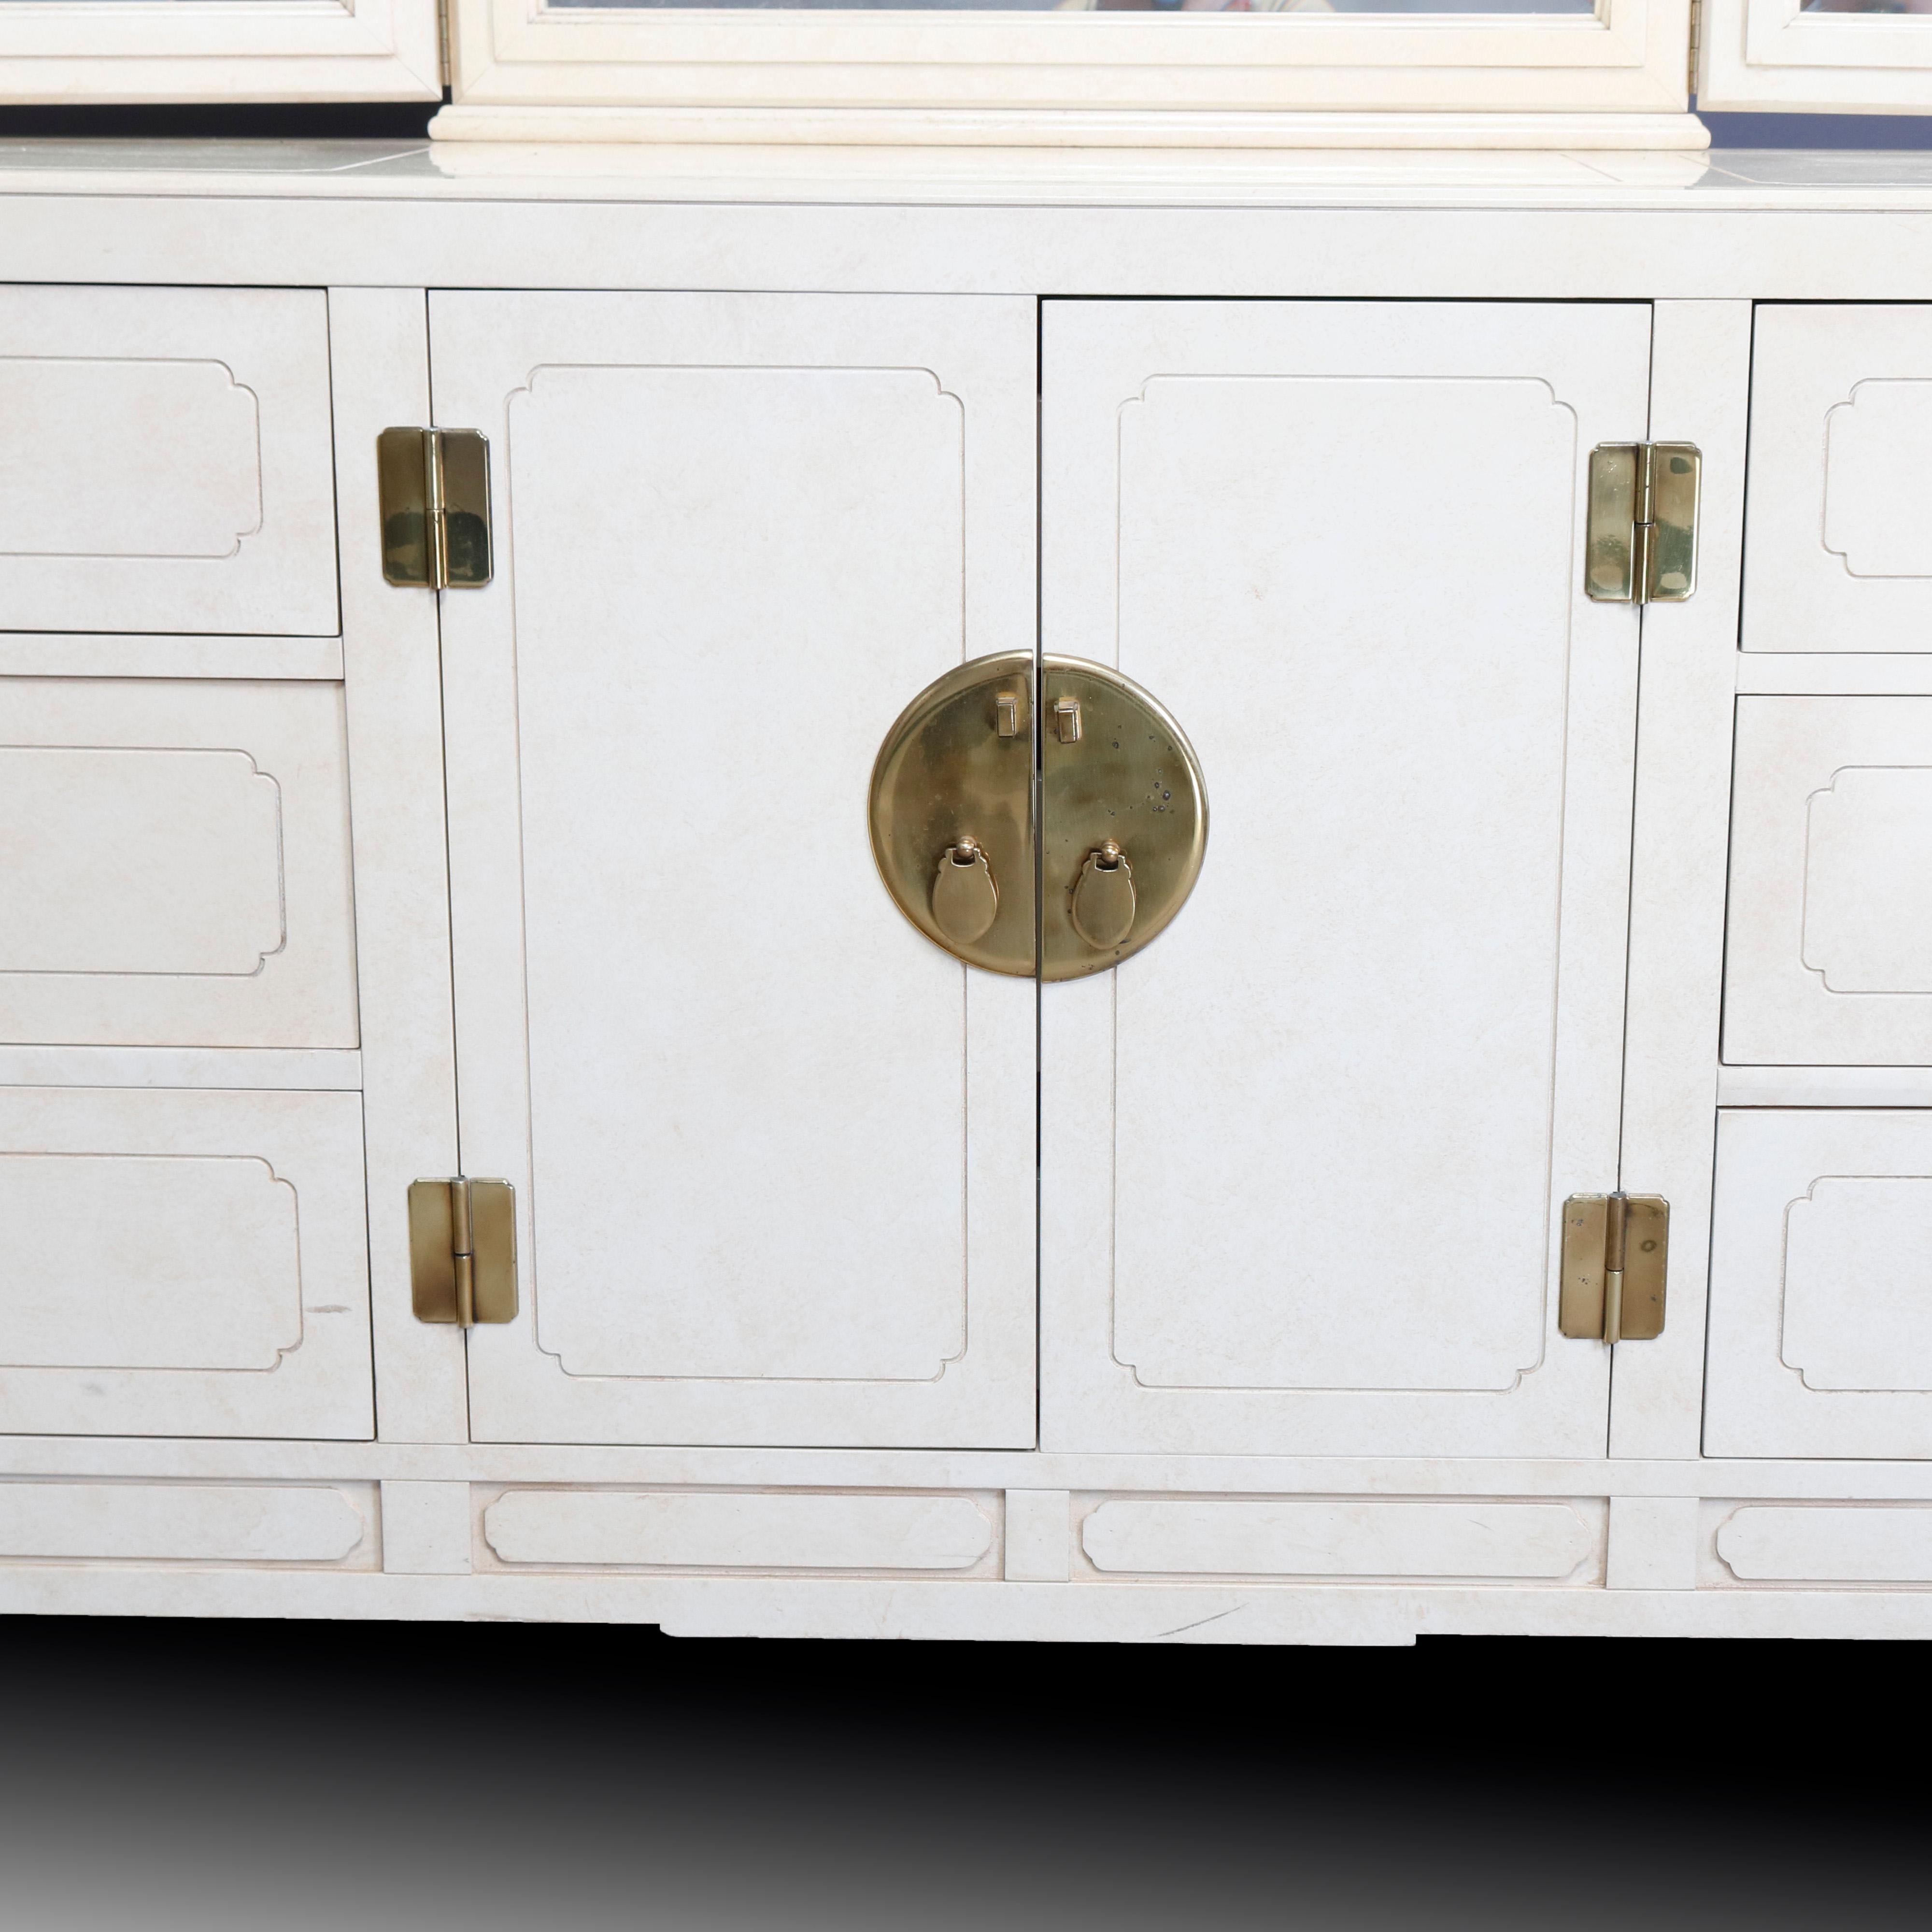 A Mid-Century Modern dresser by Hickory white offers Chinese Chippendale styling with all-over ivory enameled finish, pierced corbels having Asian influence, and cast brass hardware and accoutrements. Case with adjustable triptych mirror surmounting